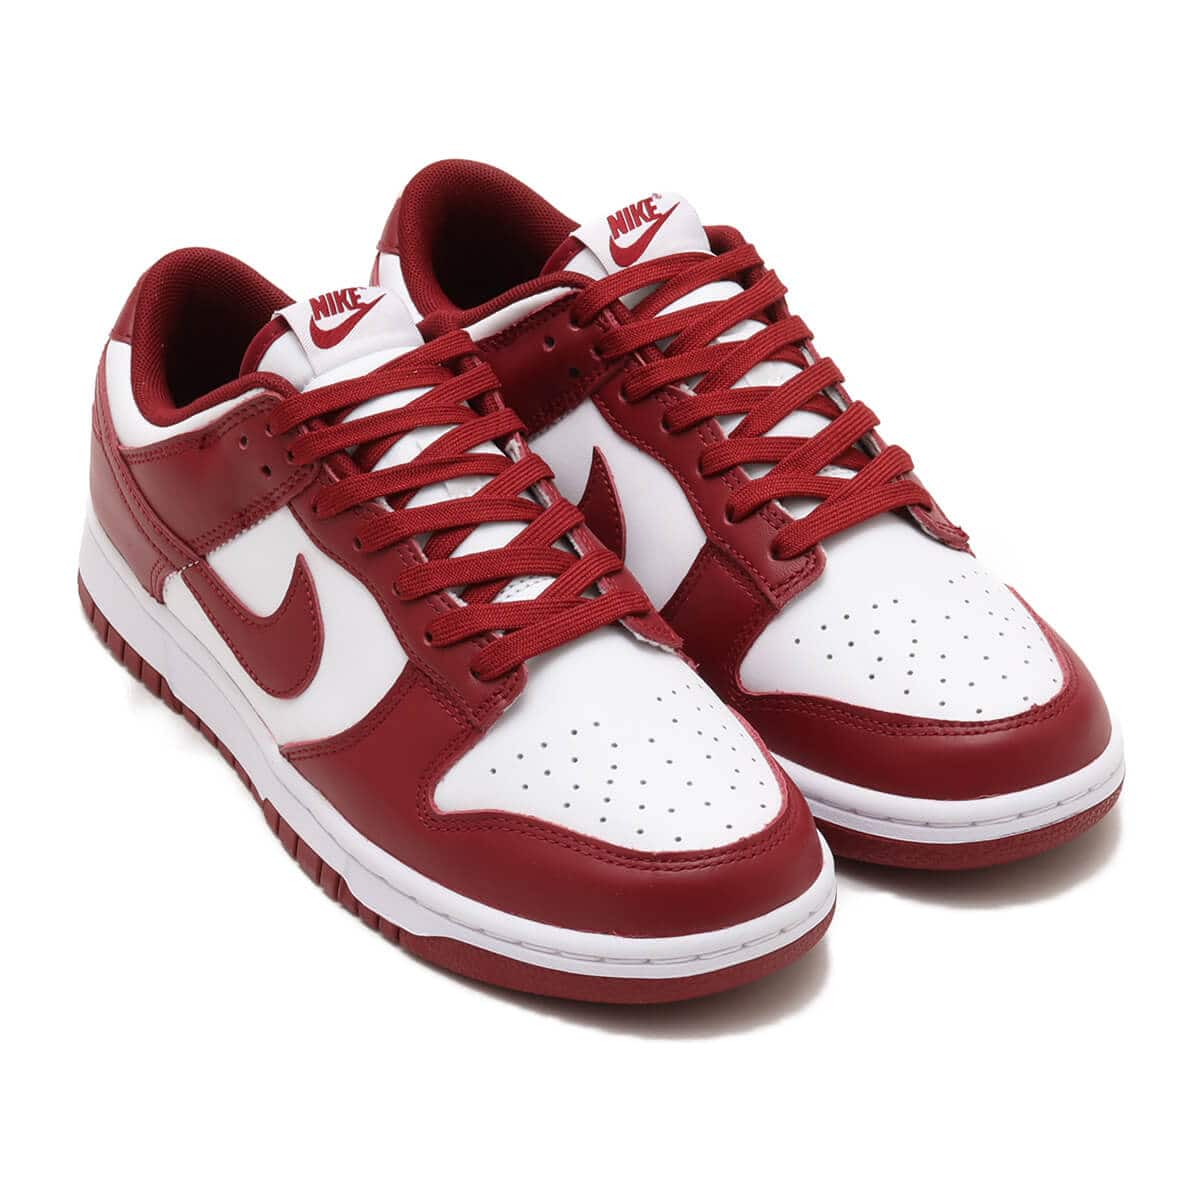 NIKE Dunk Low Team Red and White 26.5レディース